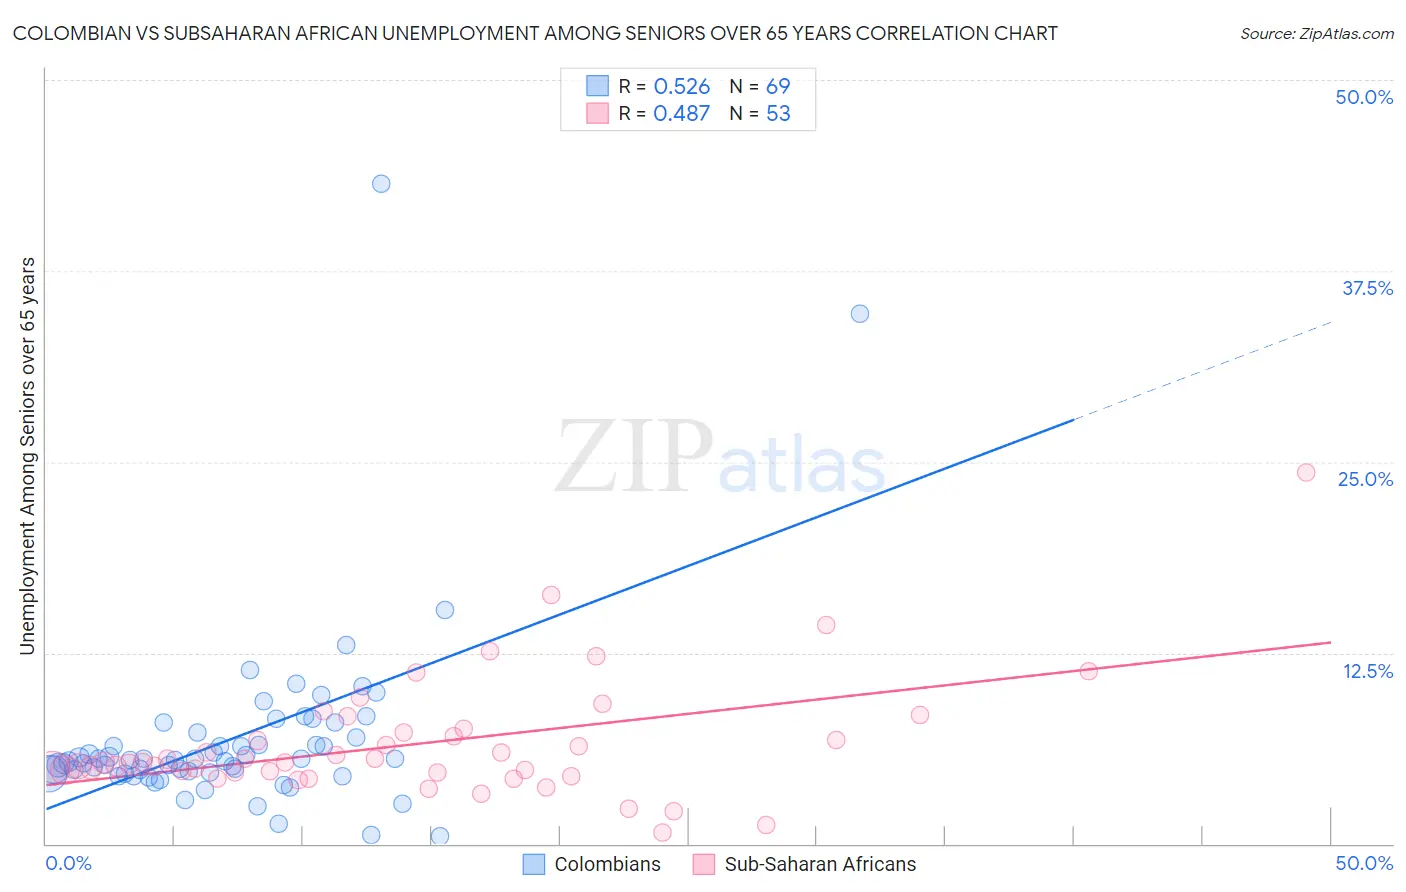 Colombian vs Subsaharan African Unemployment Among Seniors over 65 years